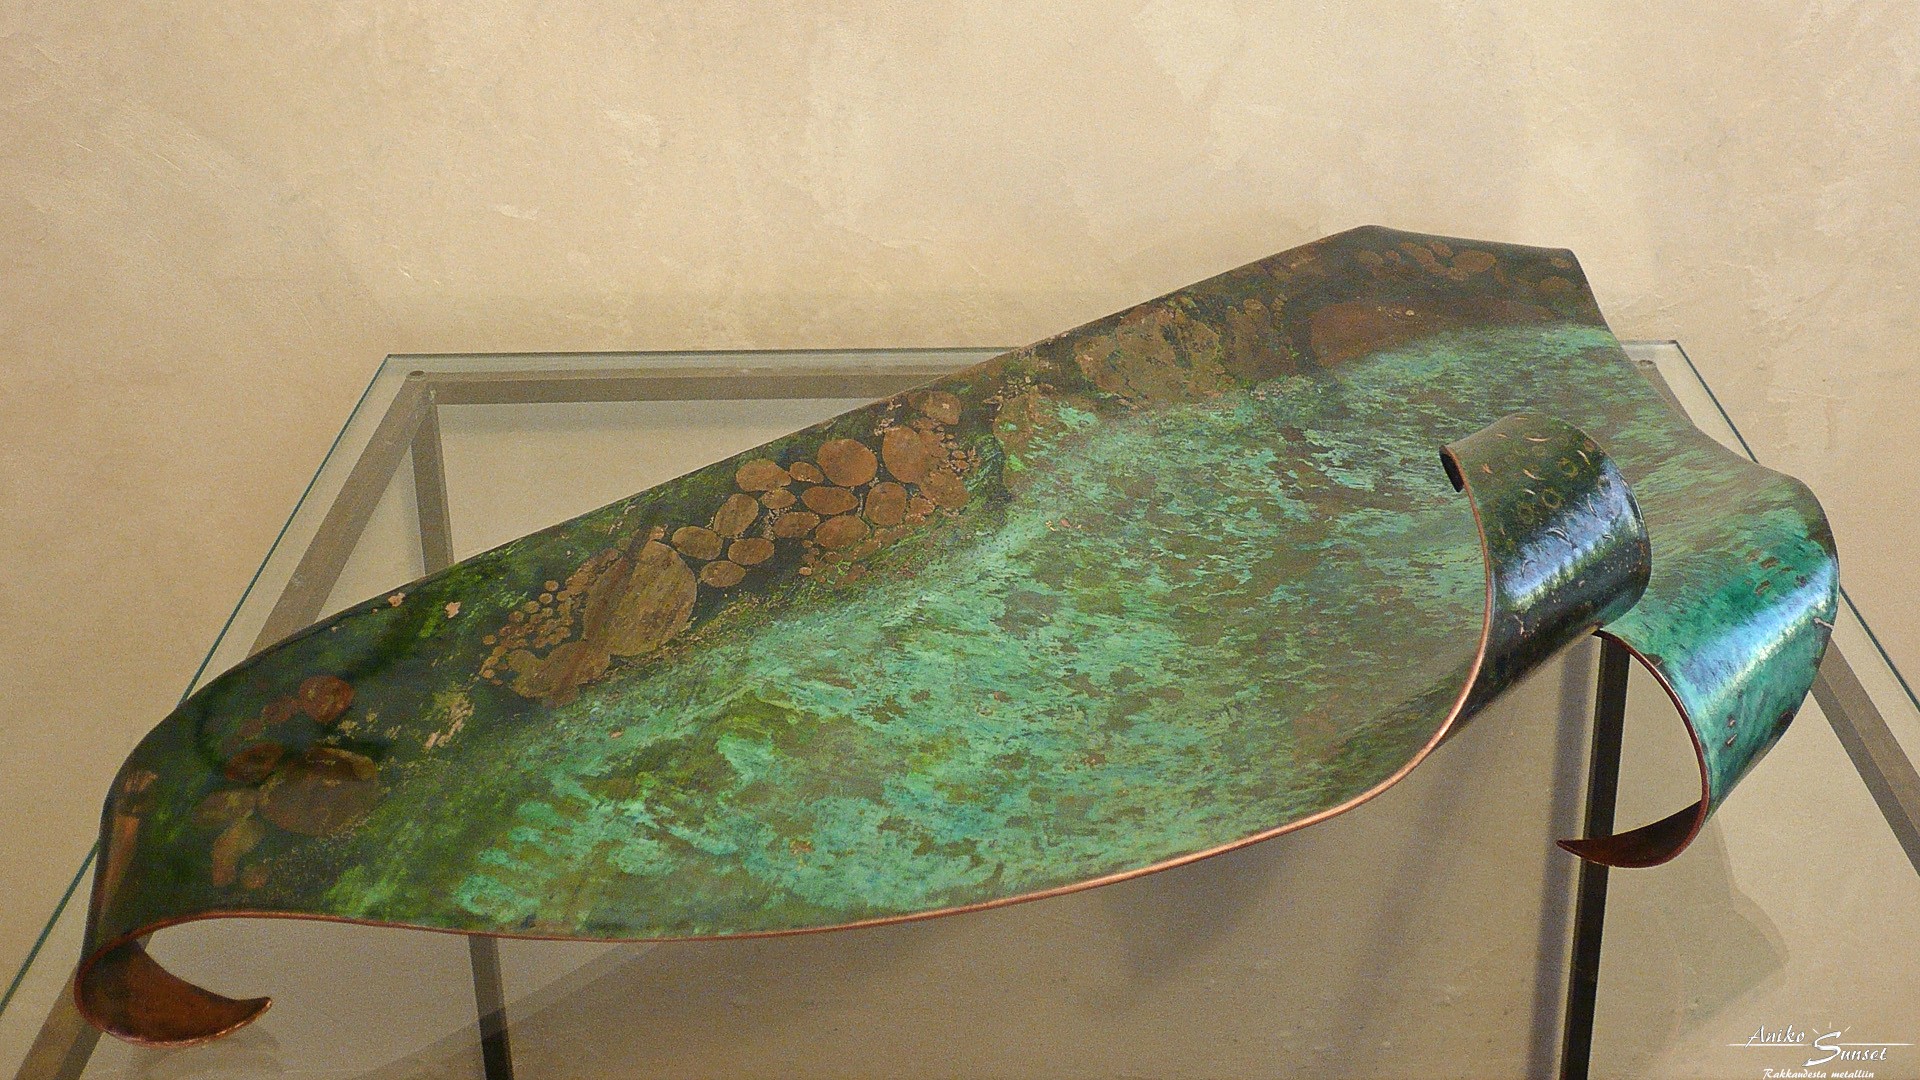 Platter "Waterfront of the trout river" - 2 mm copper sheet patinated using a special technique, 580x260 mm